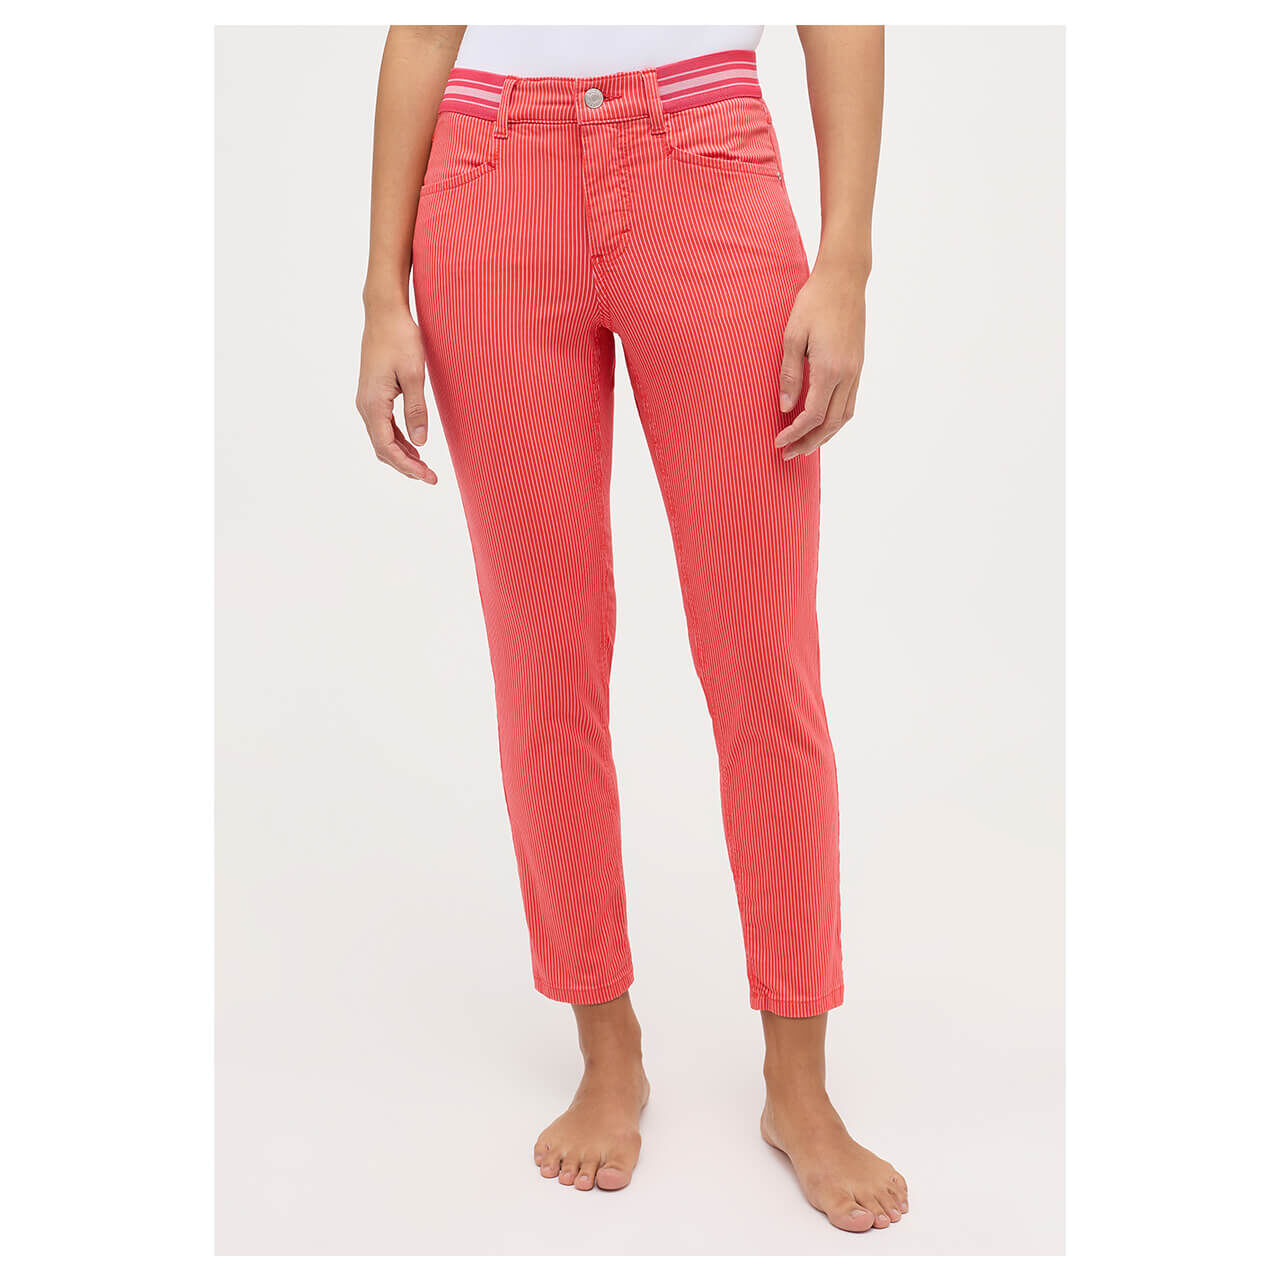 Angels Ornella Sporty 7/8 Jeans aperol used